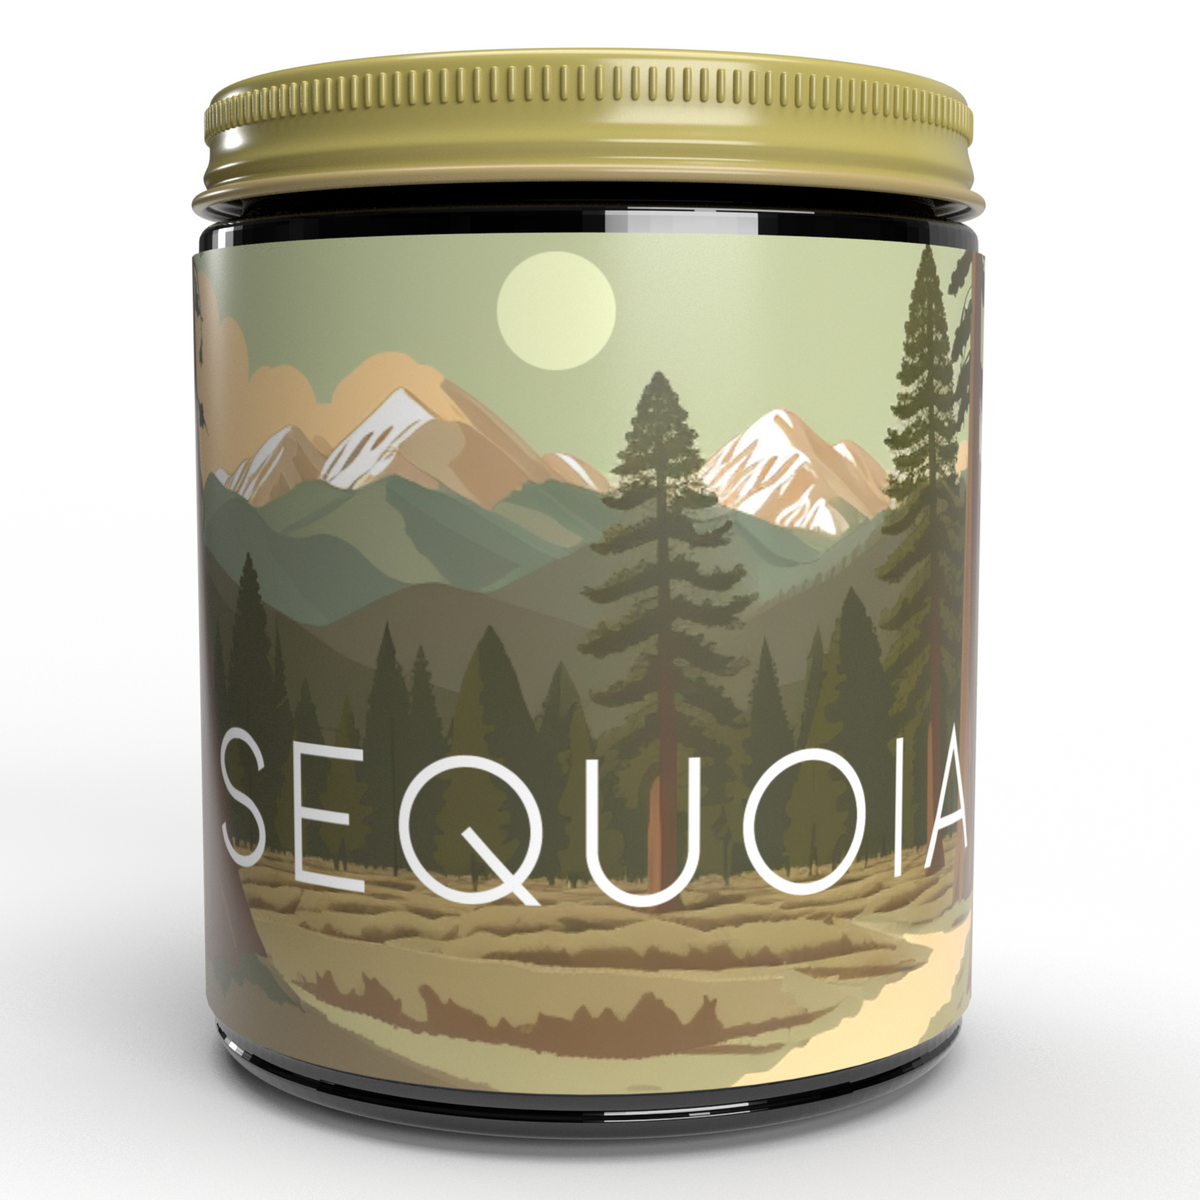 Sequoia National Park Soy Wax Candle - 9oz